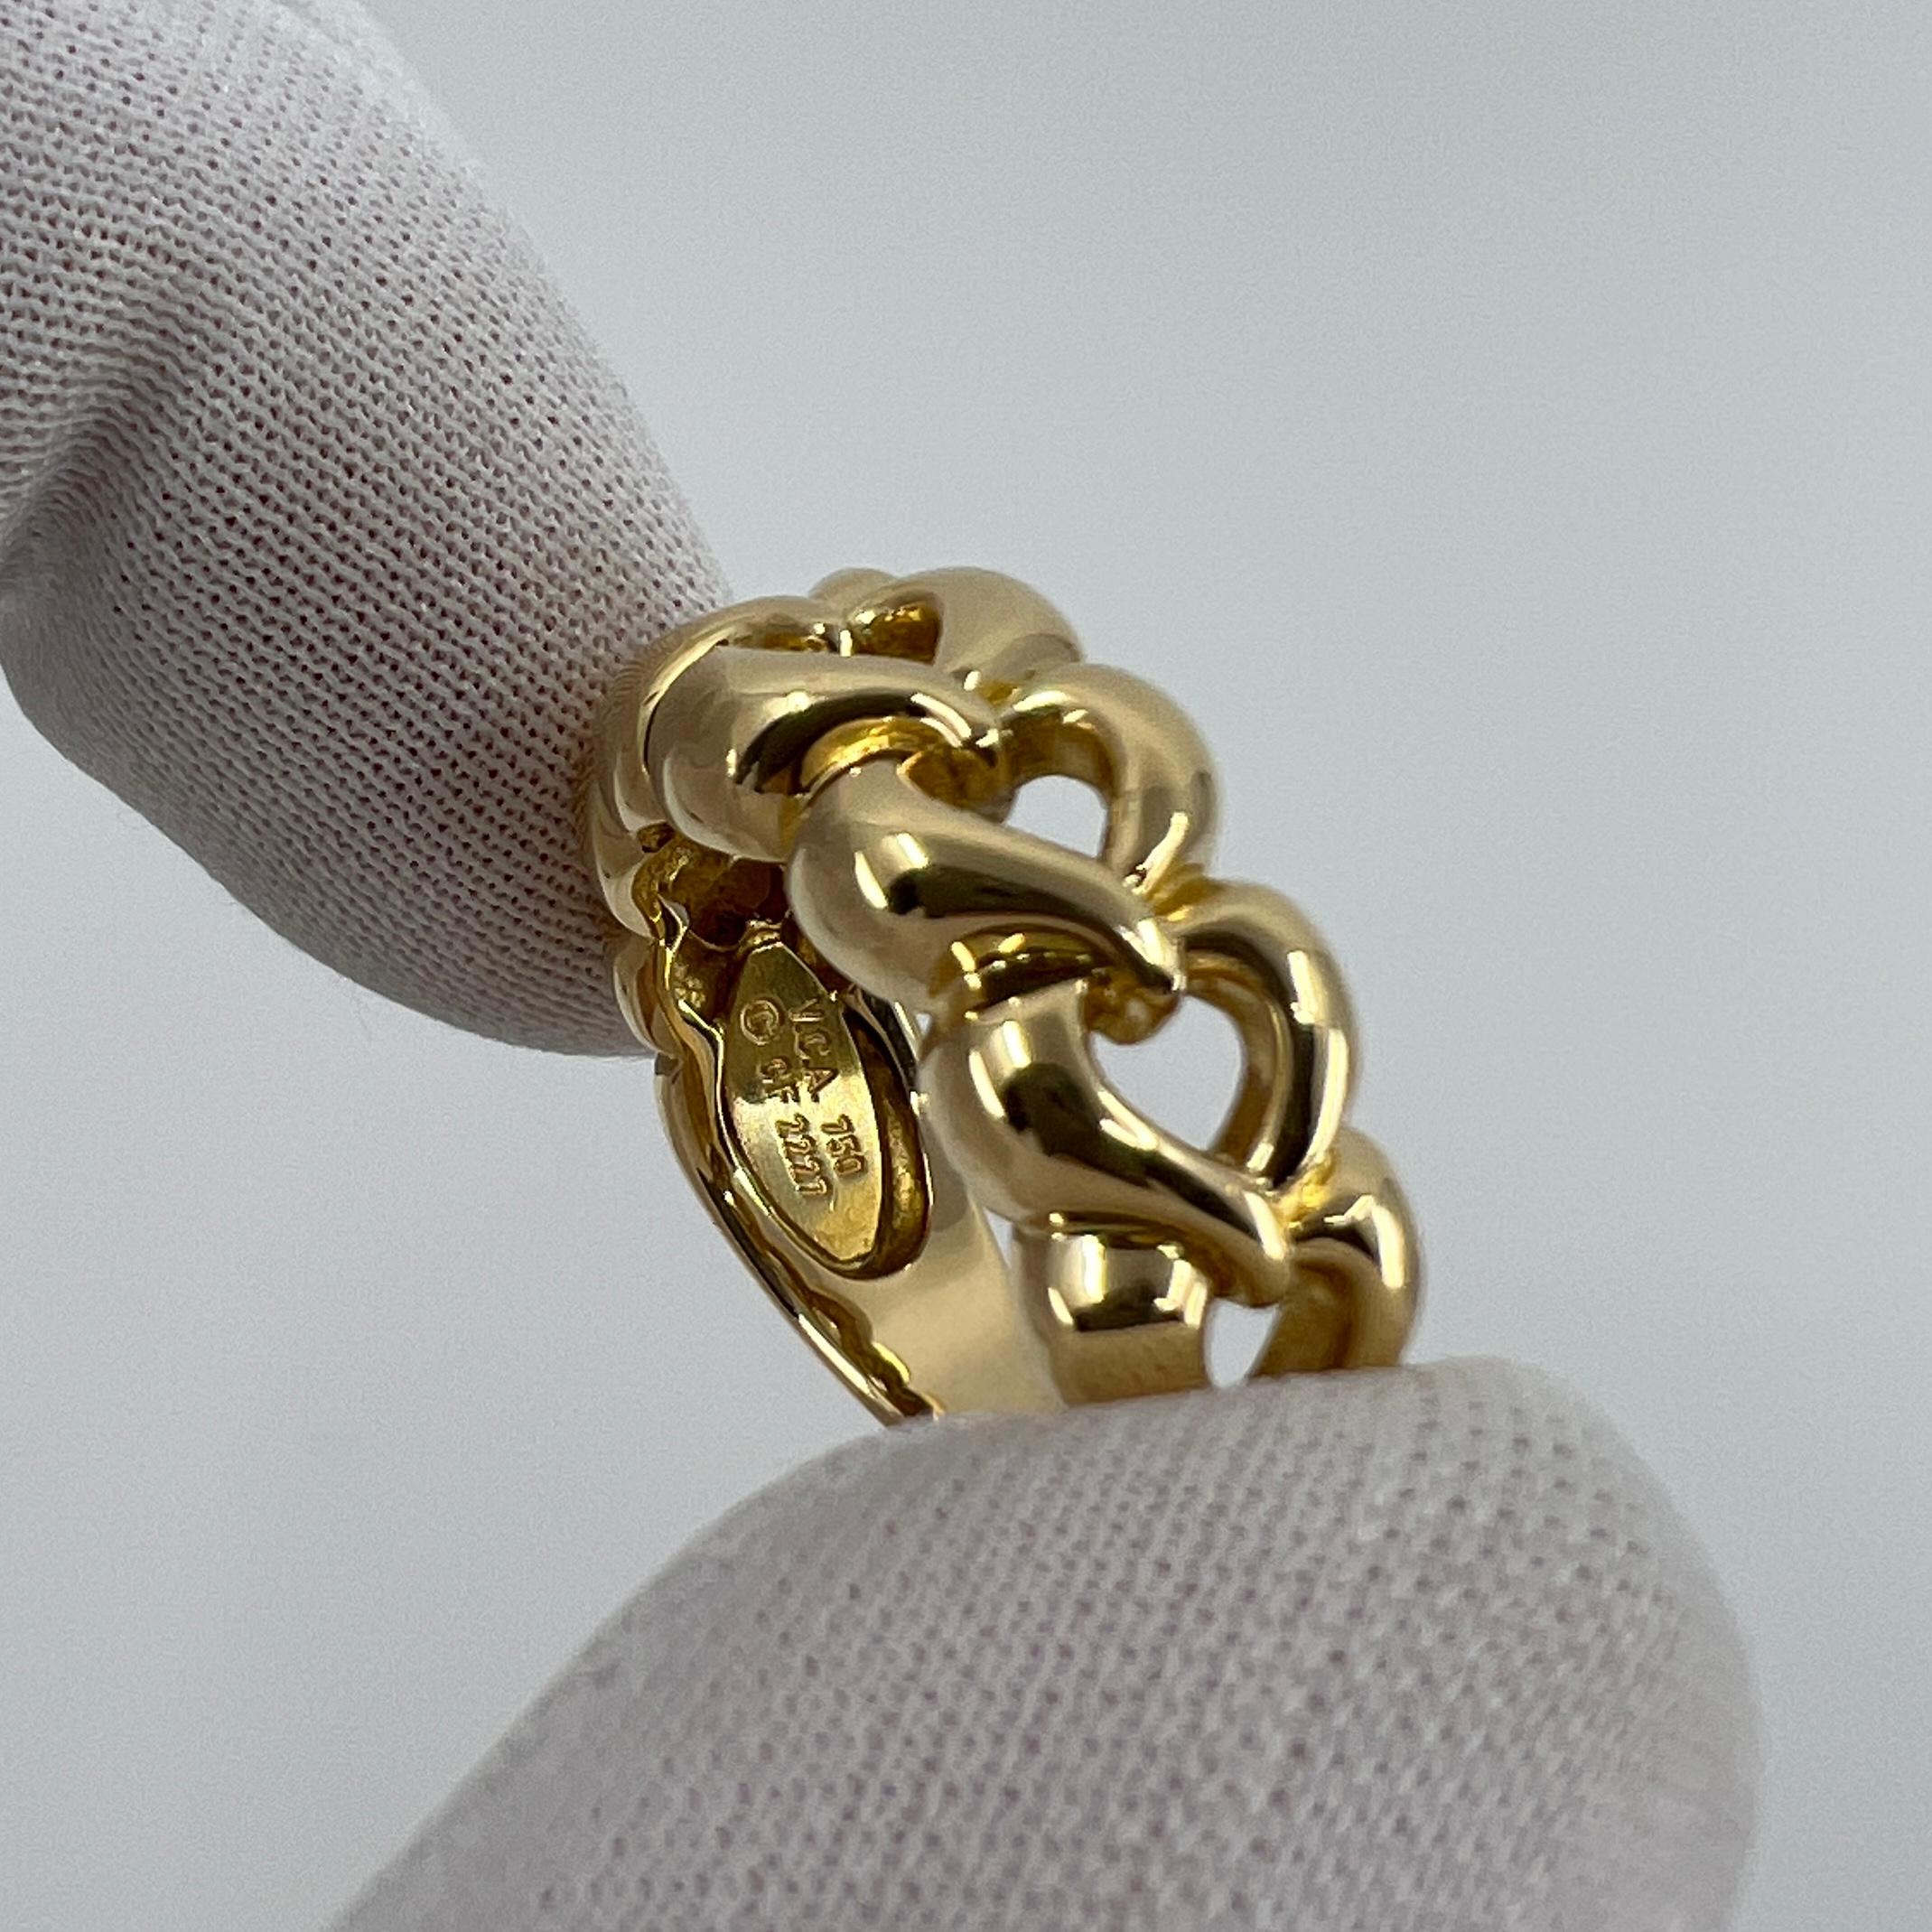 Rare Vintage Van Cleef & Arpels 18k Yellow Gold Open Heart Band Ring with Box For Sale 2